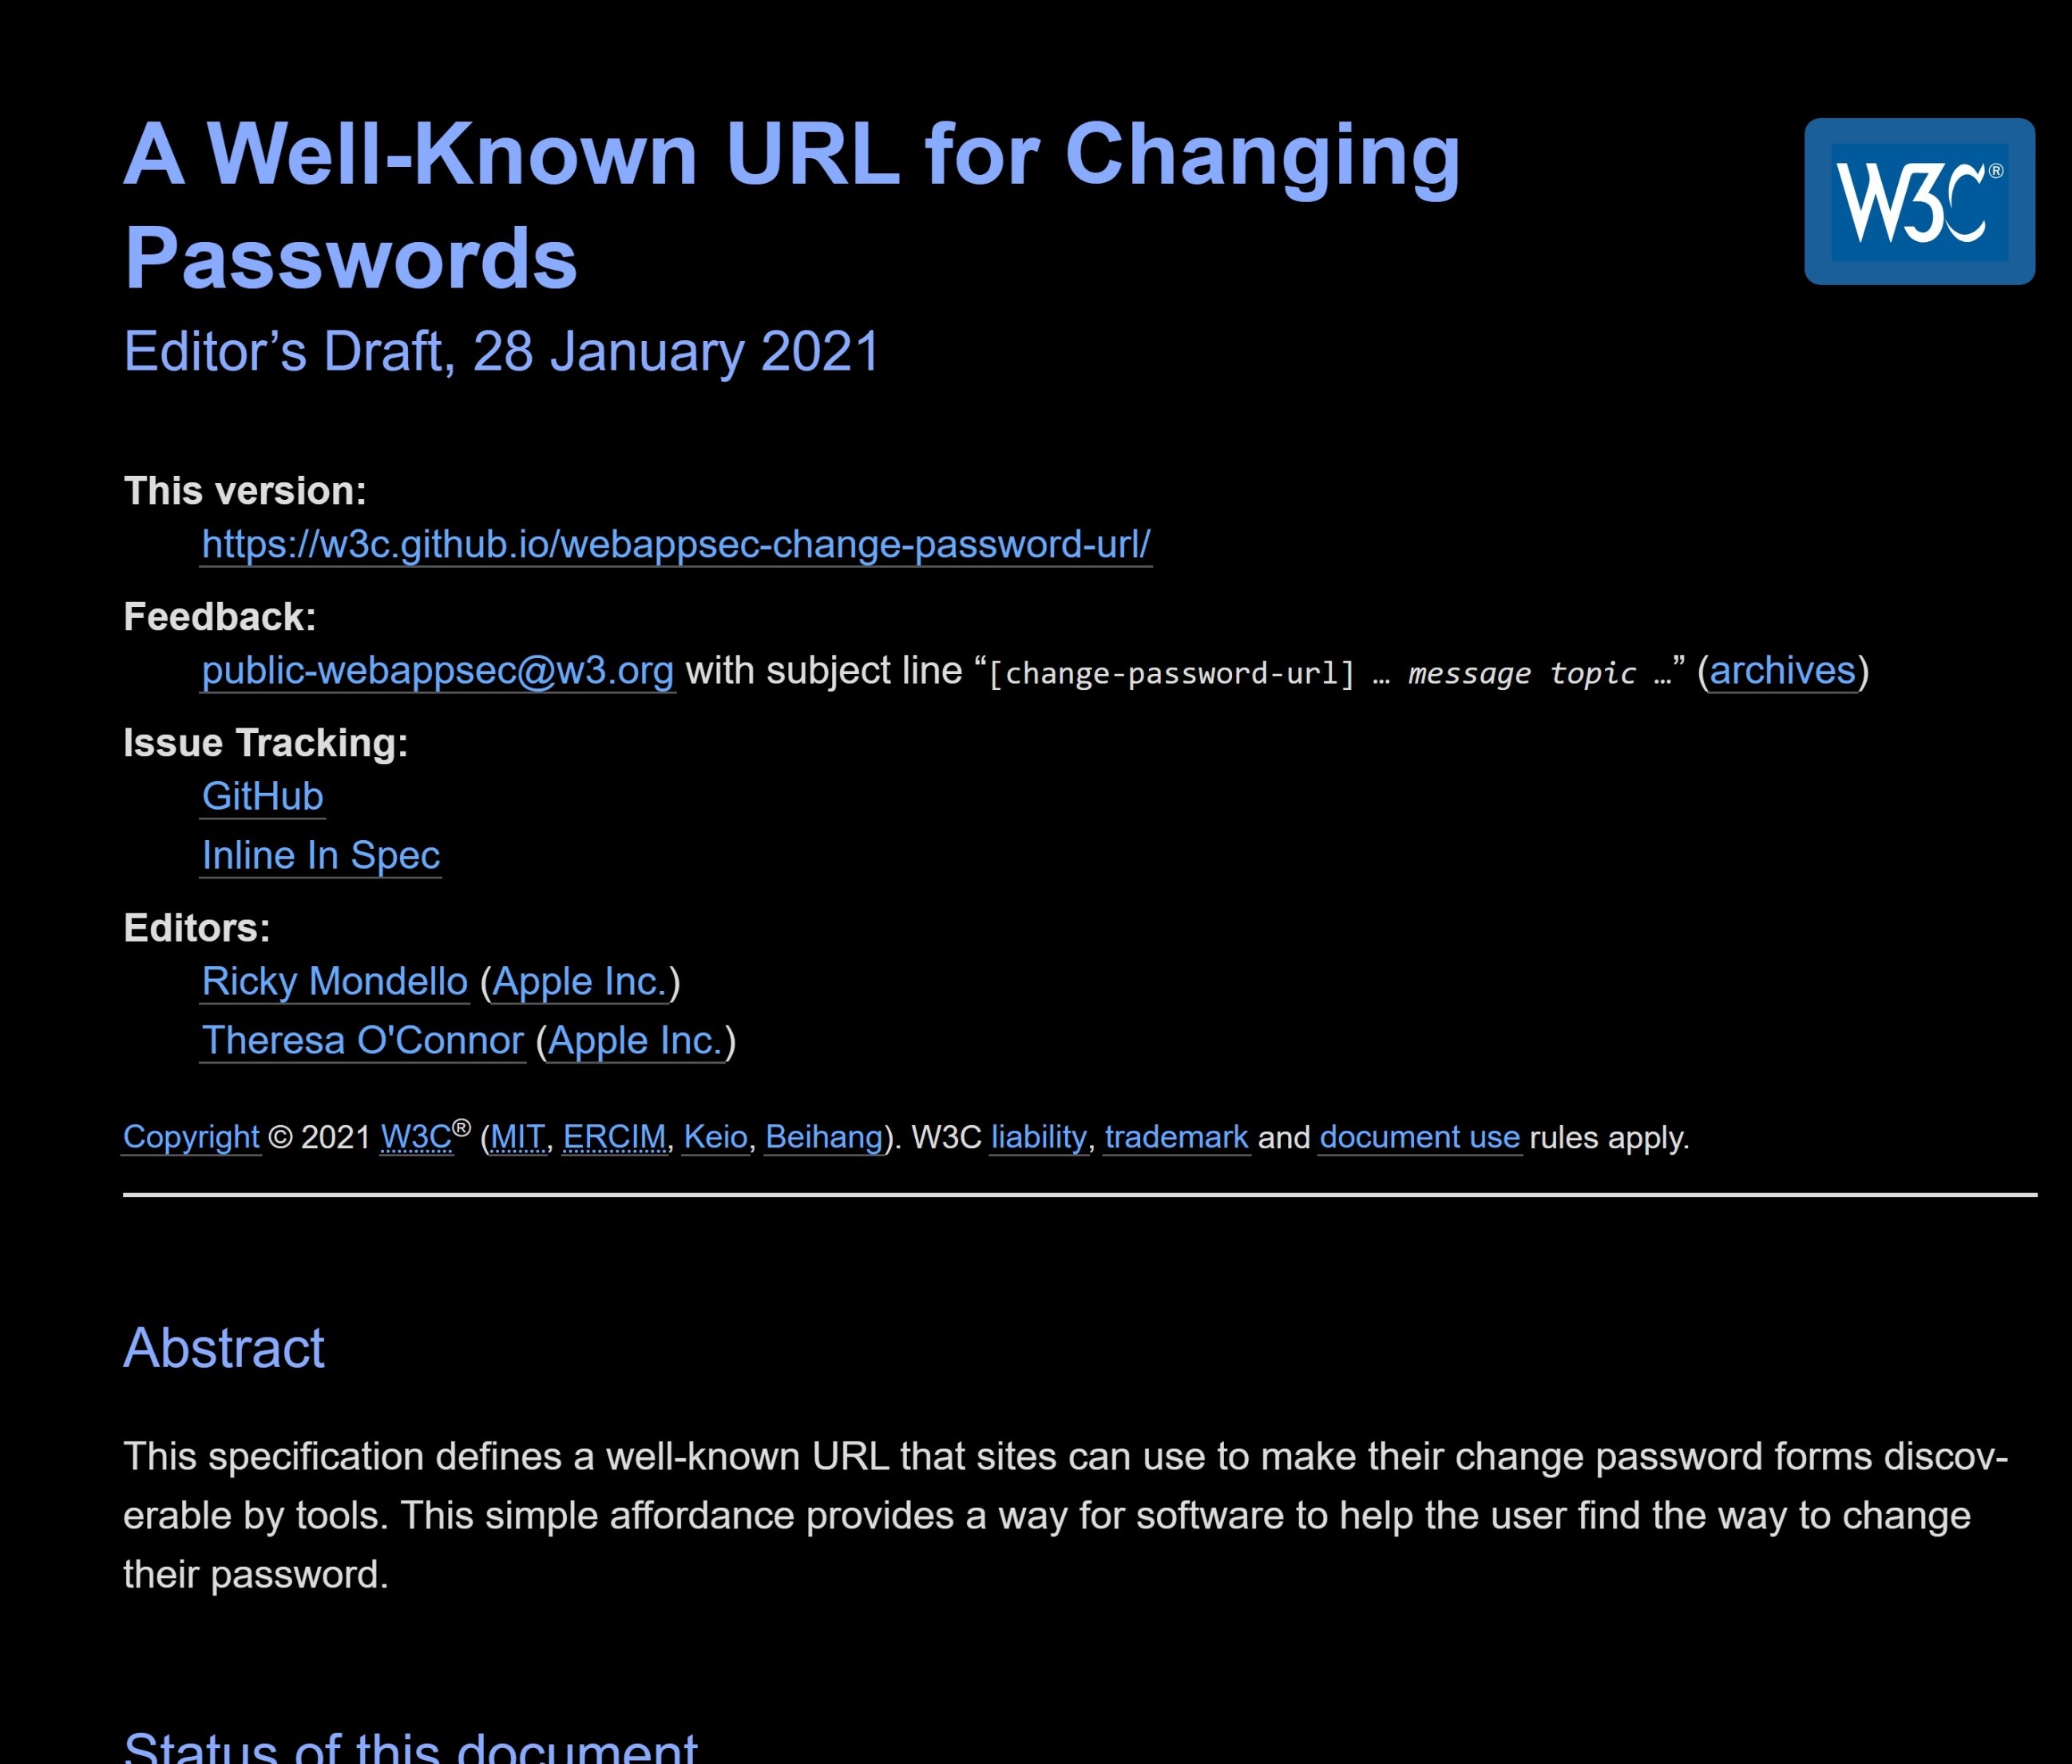 A Well-known URL for Changing Passwords - W3C spec (top of document)